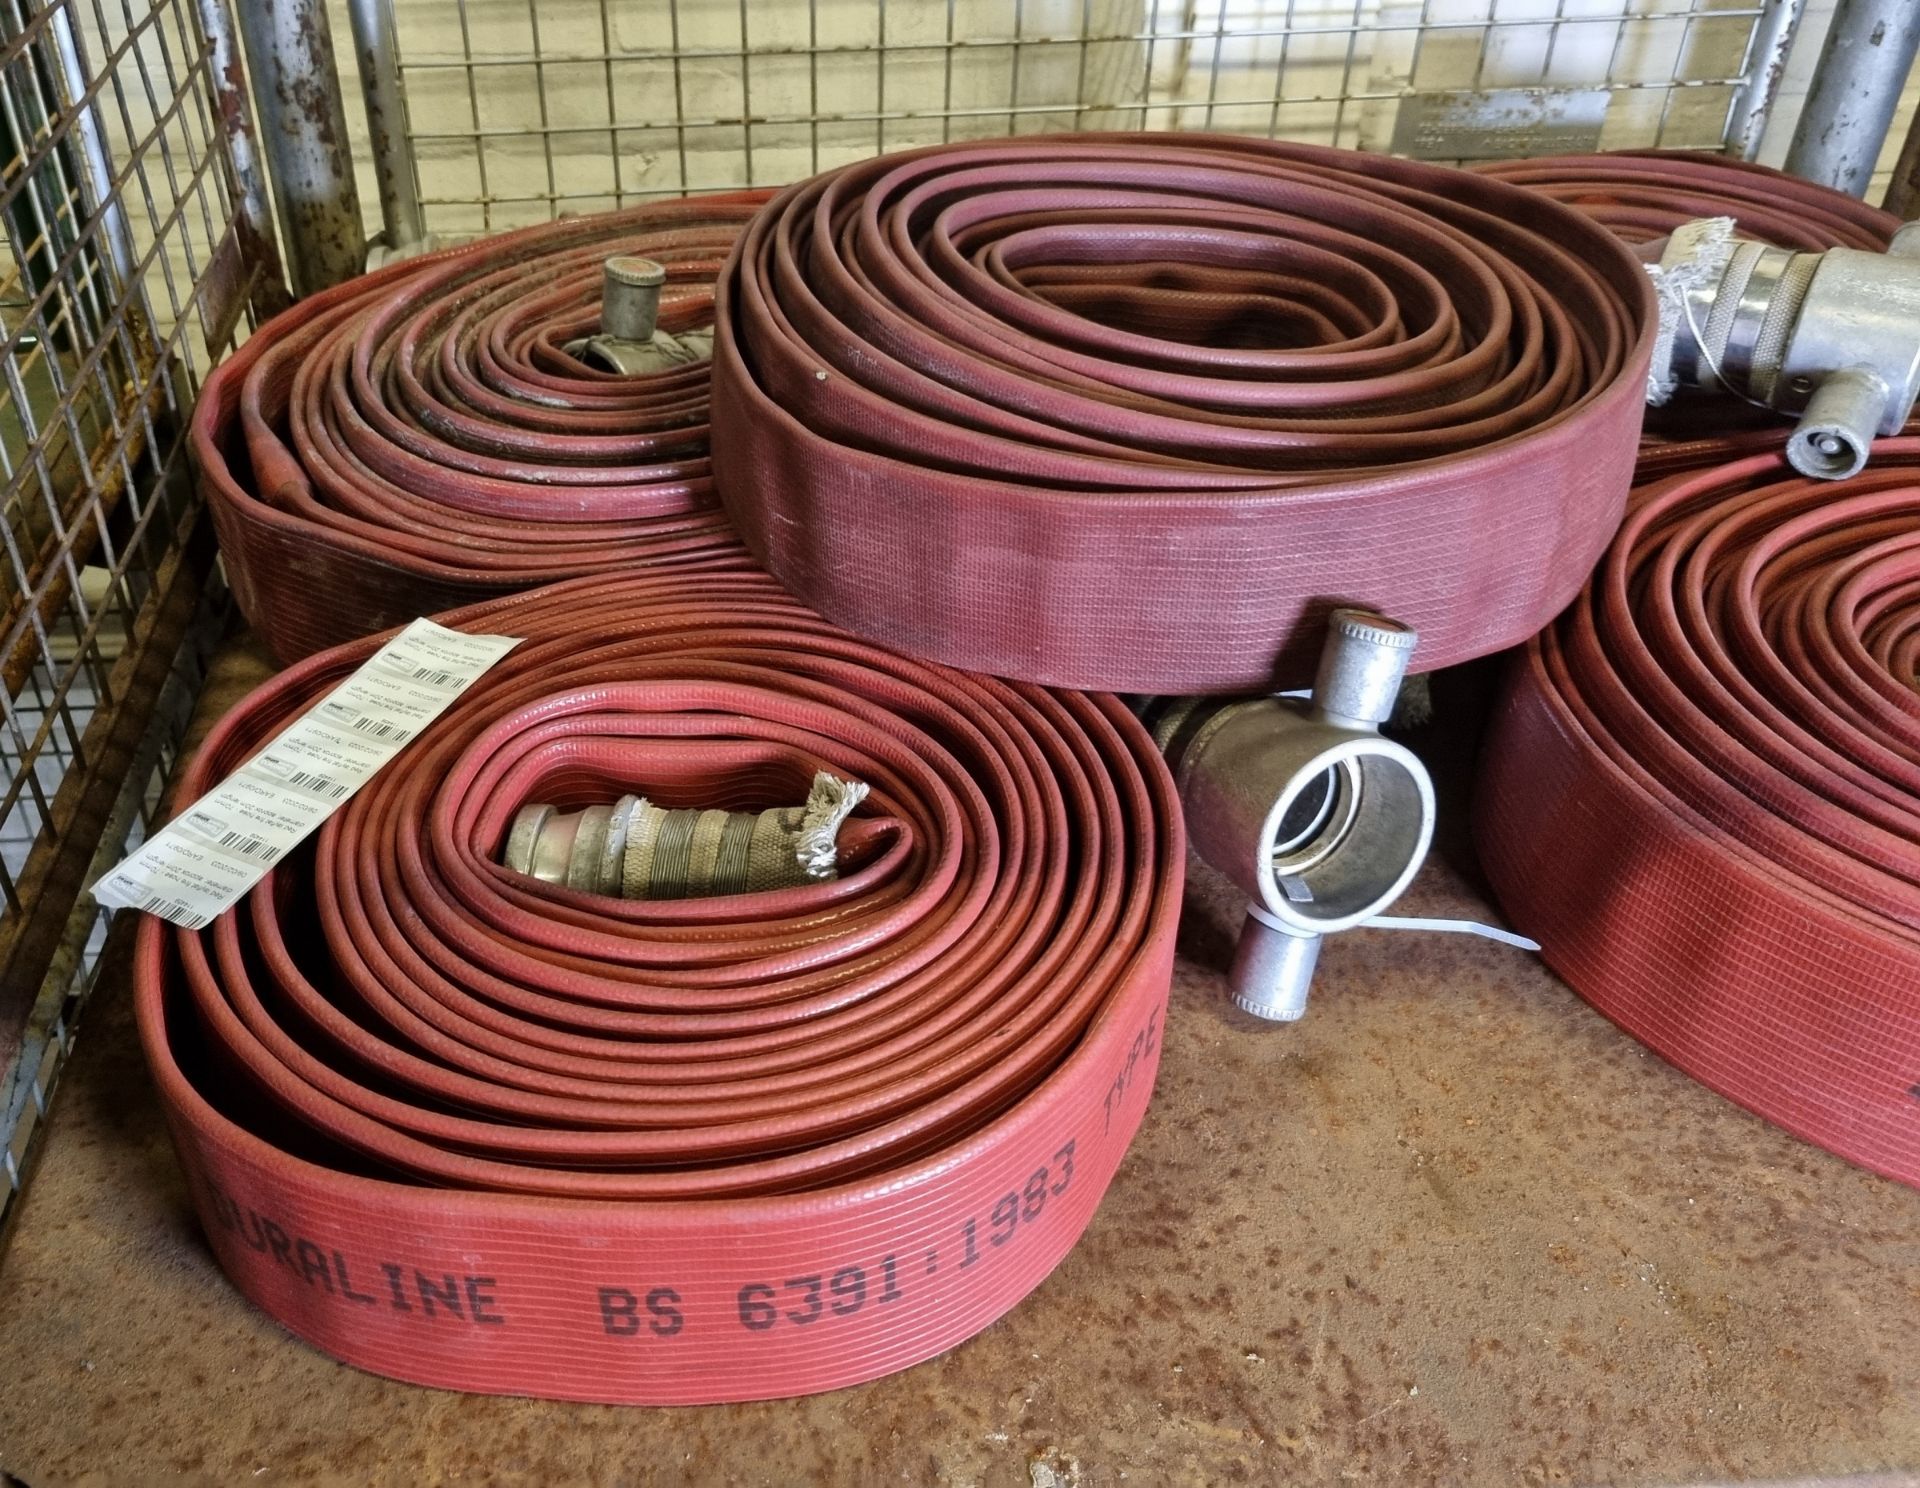 5x Red layflat fire hose - 70mm diameter, approx 20m length - Image 4 of 4